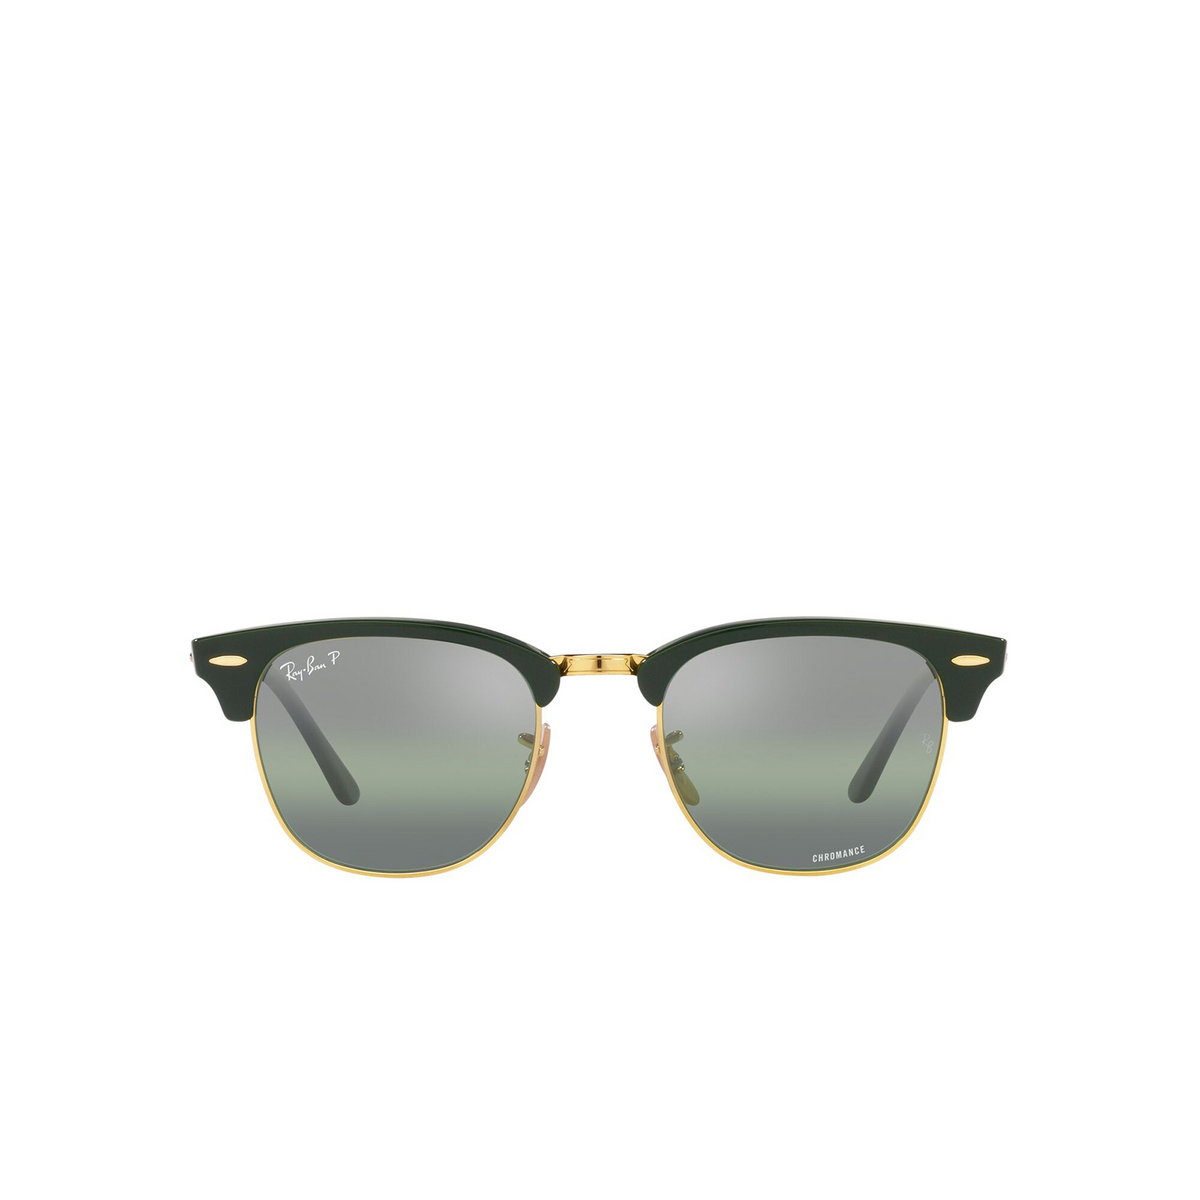 Ray-Ban CLUBMASTER Sunglasses 1368G4 Green - front view